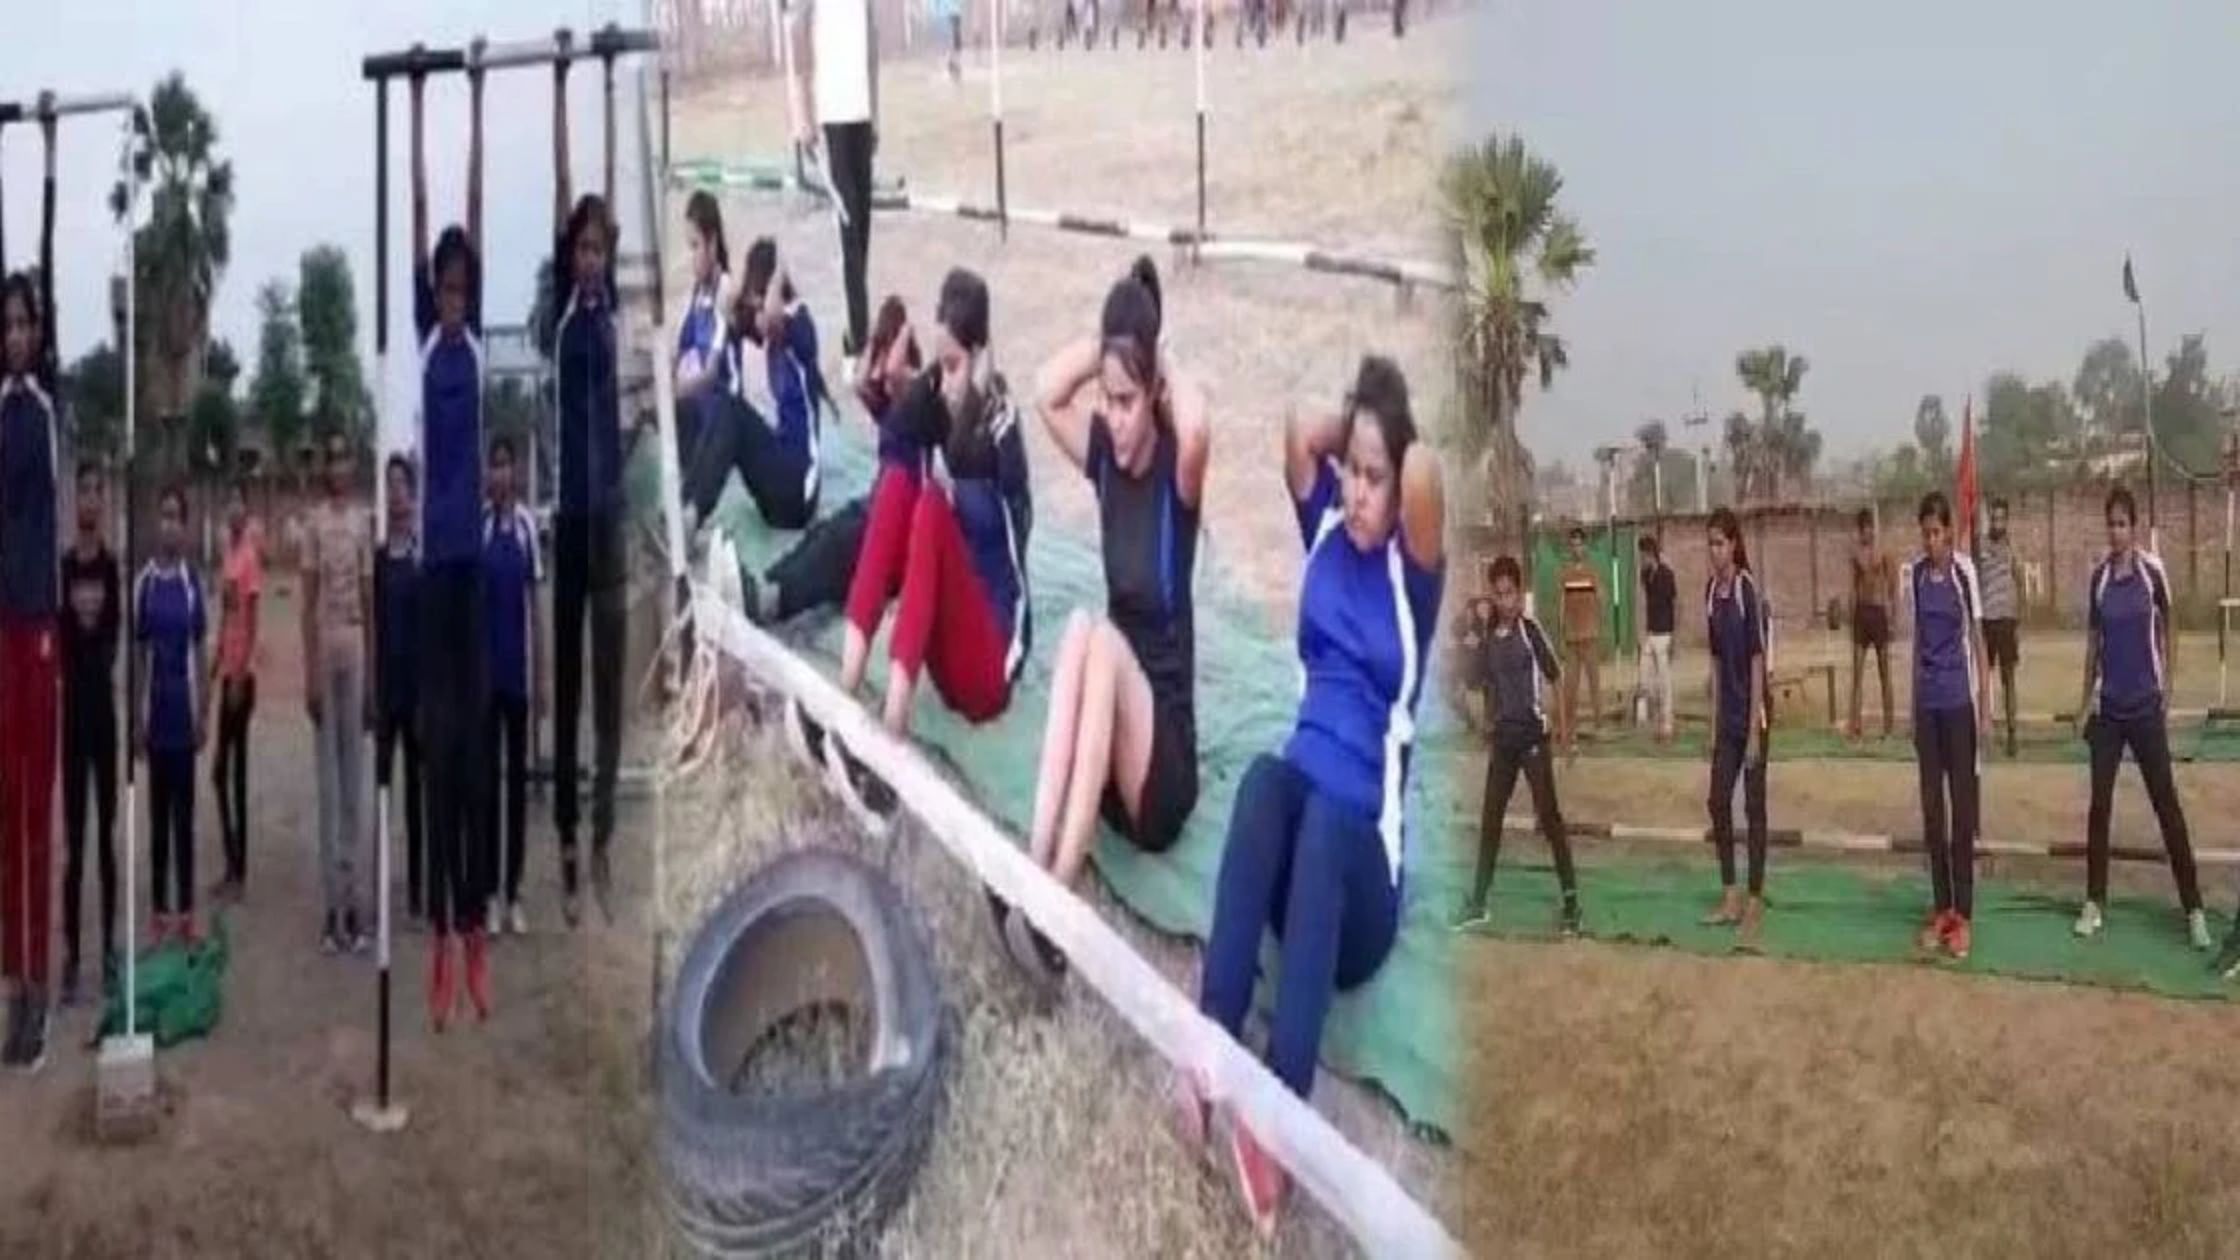 Bihar Daughters Are Sweating In The Field Preparing To Become Agniveer